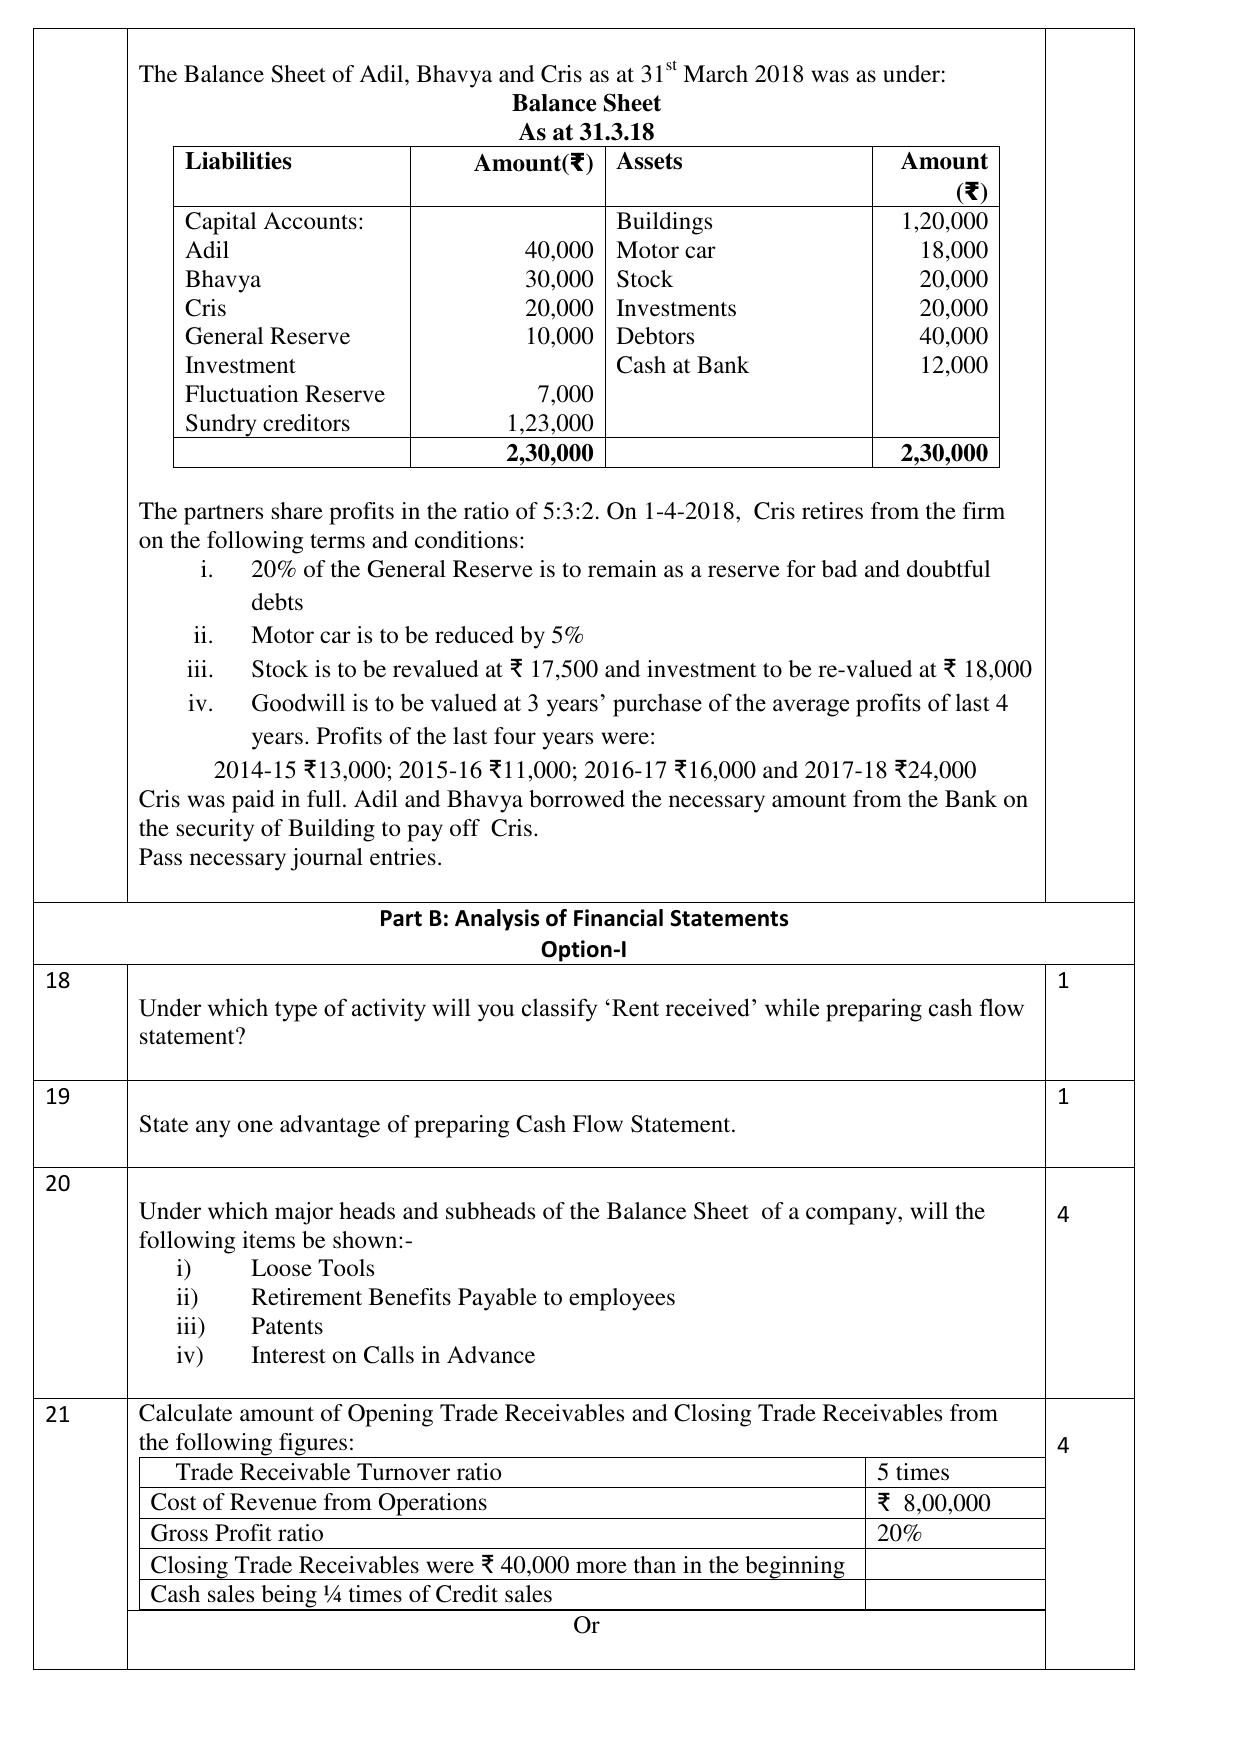 CBSE Class 12 Accountancy-Sample Paper 2018-19 - Page 7